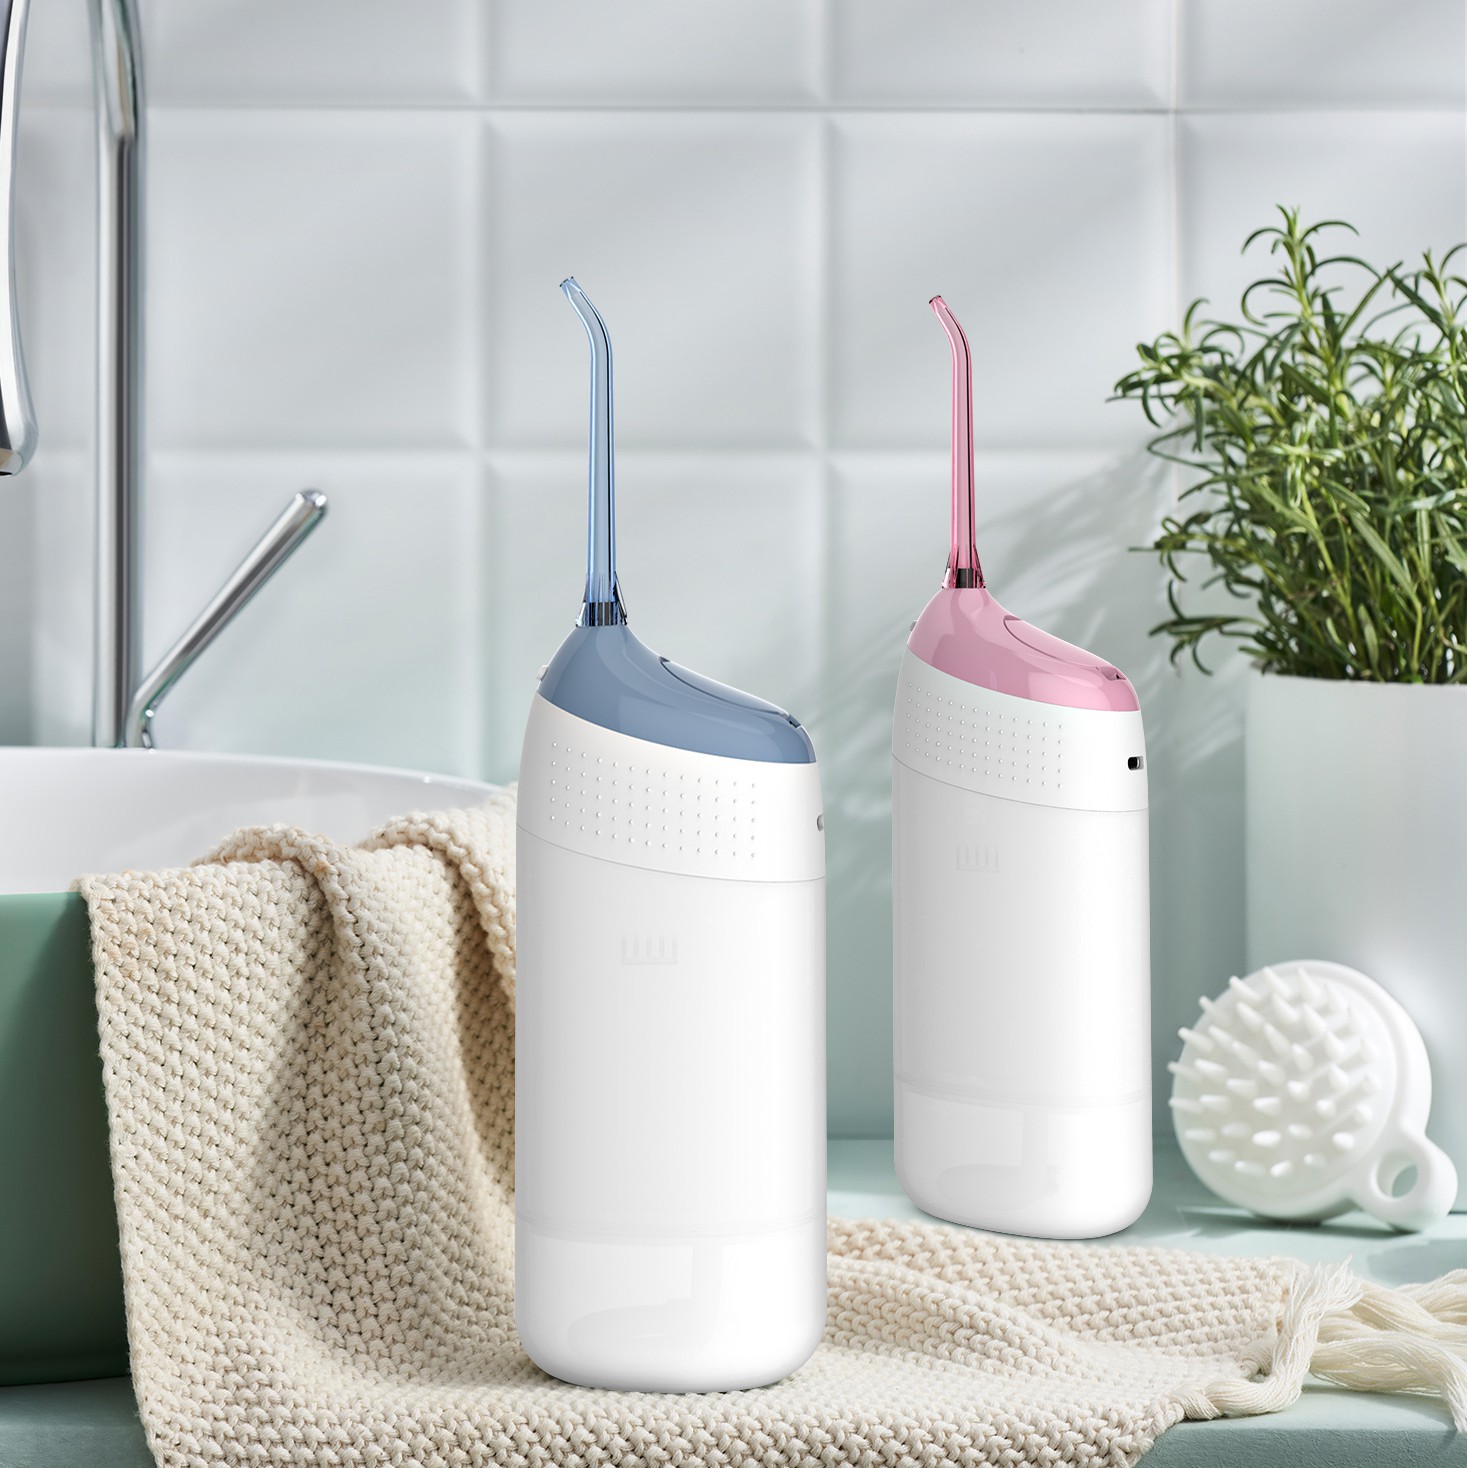 Is the Dental Water Flosser Useful? So said the Dental Expert